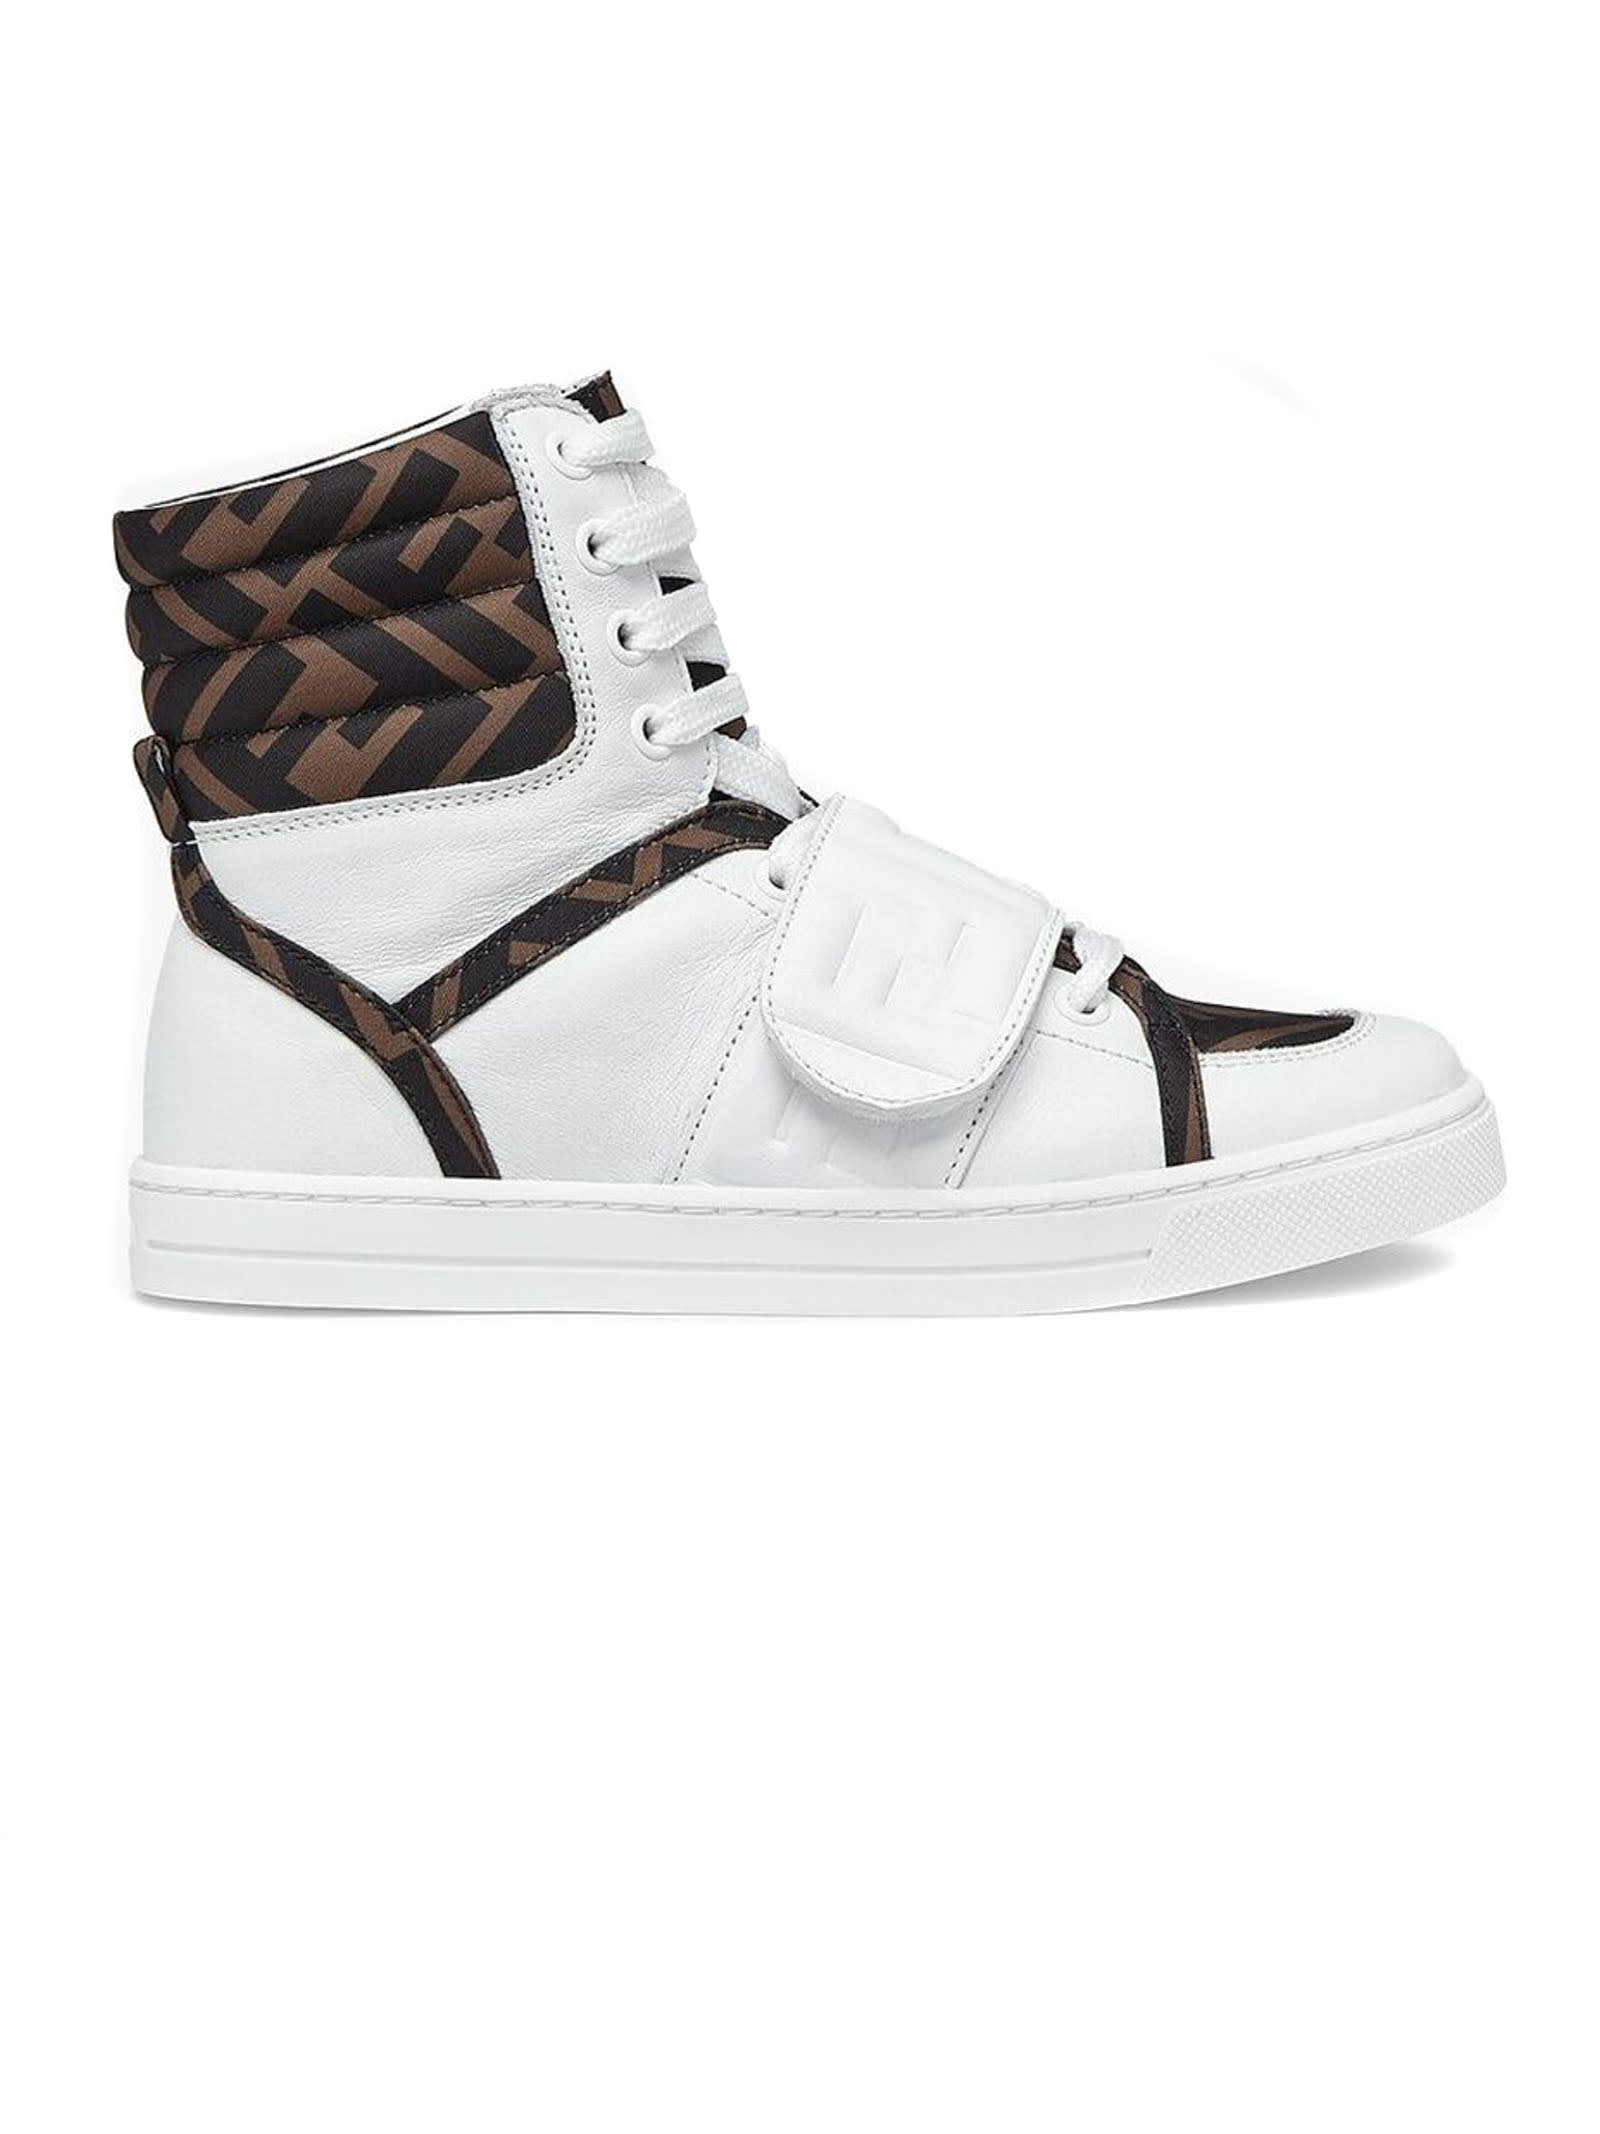 Fendi White Leather High-top Sneakers